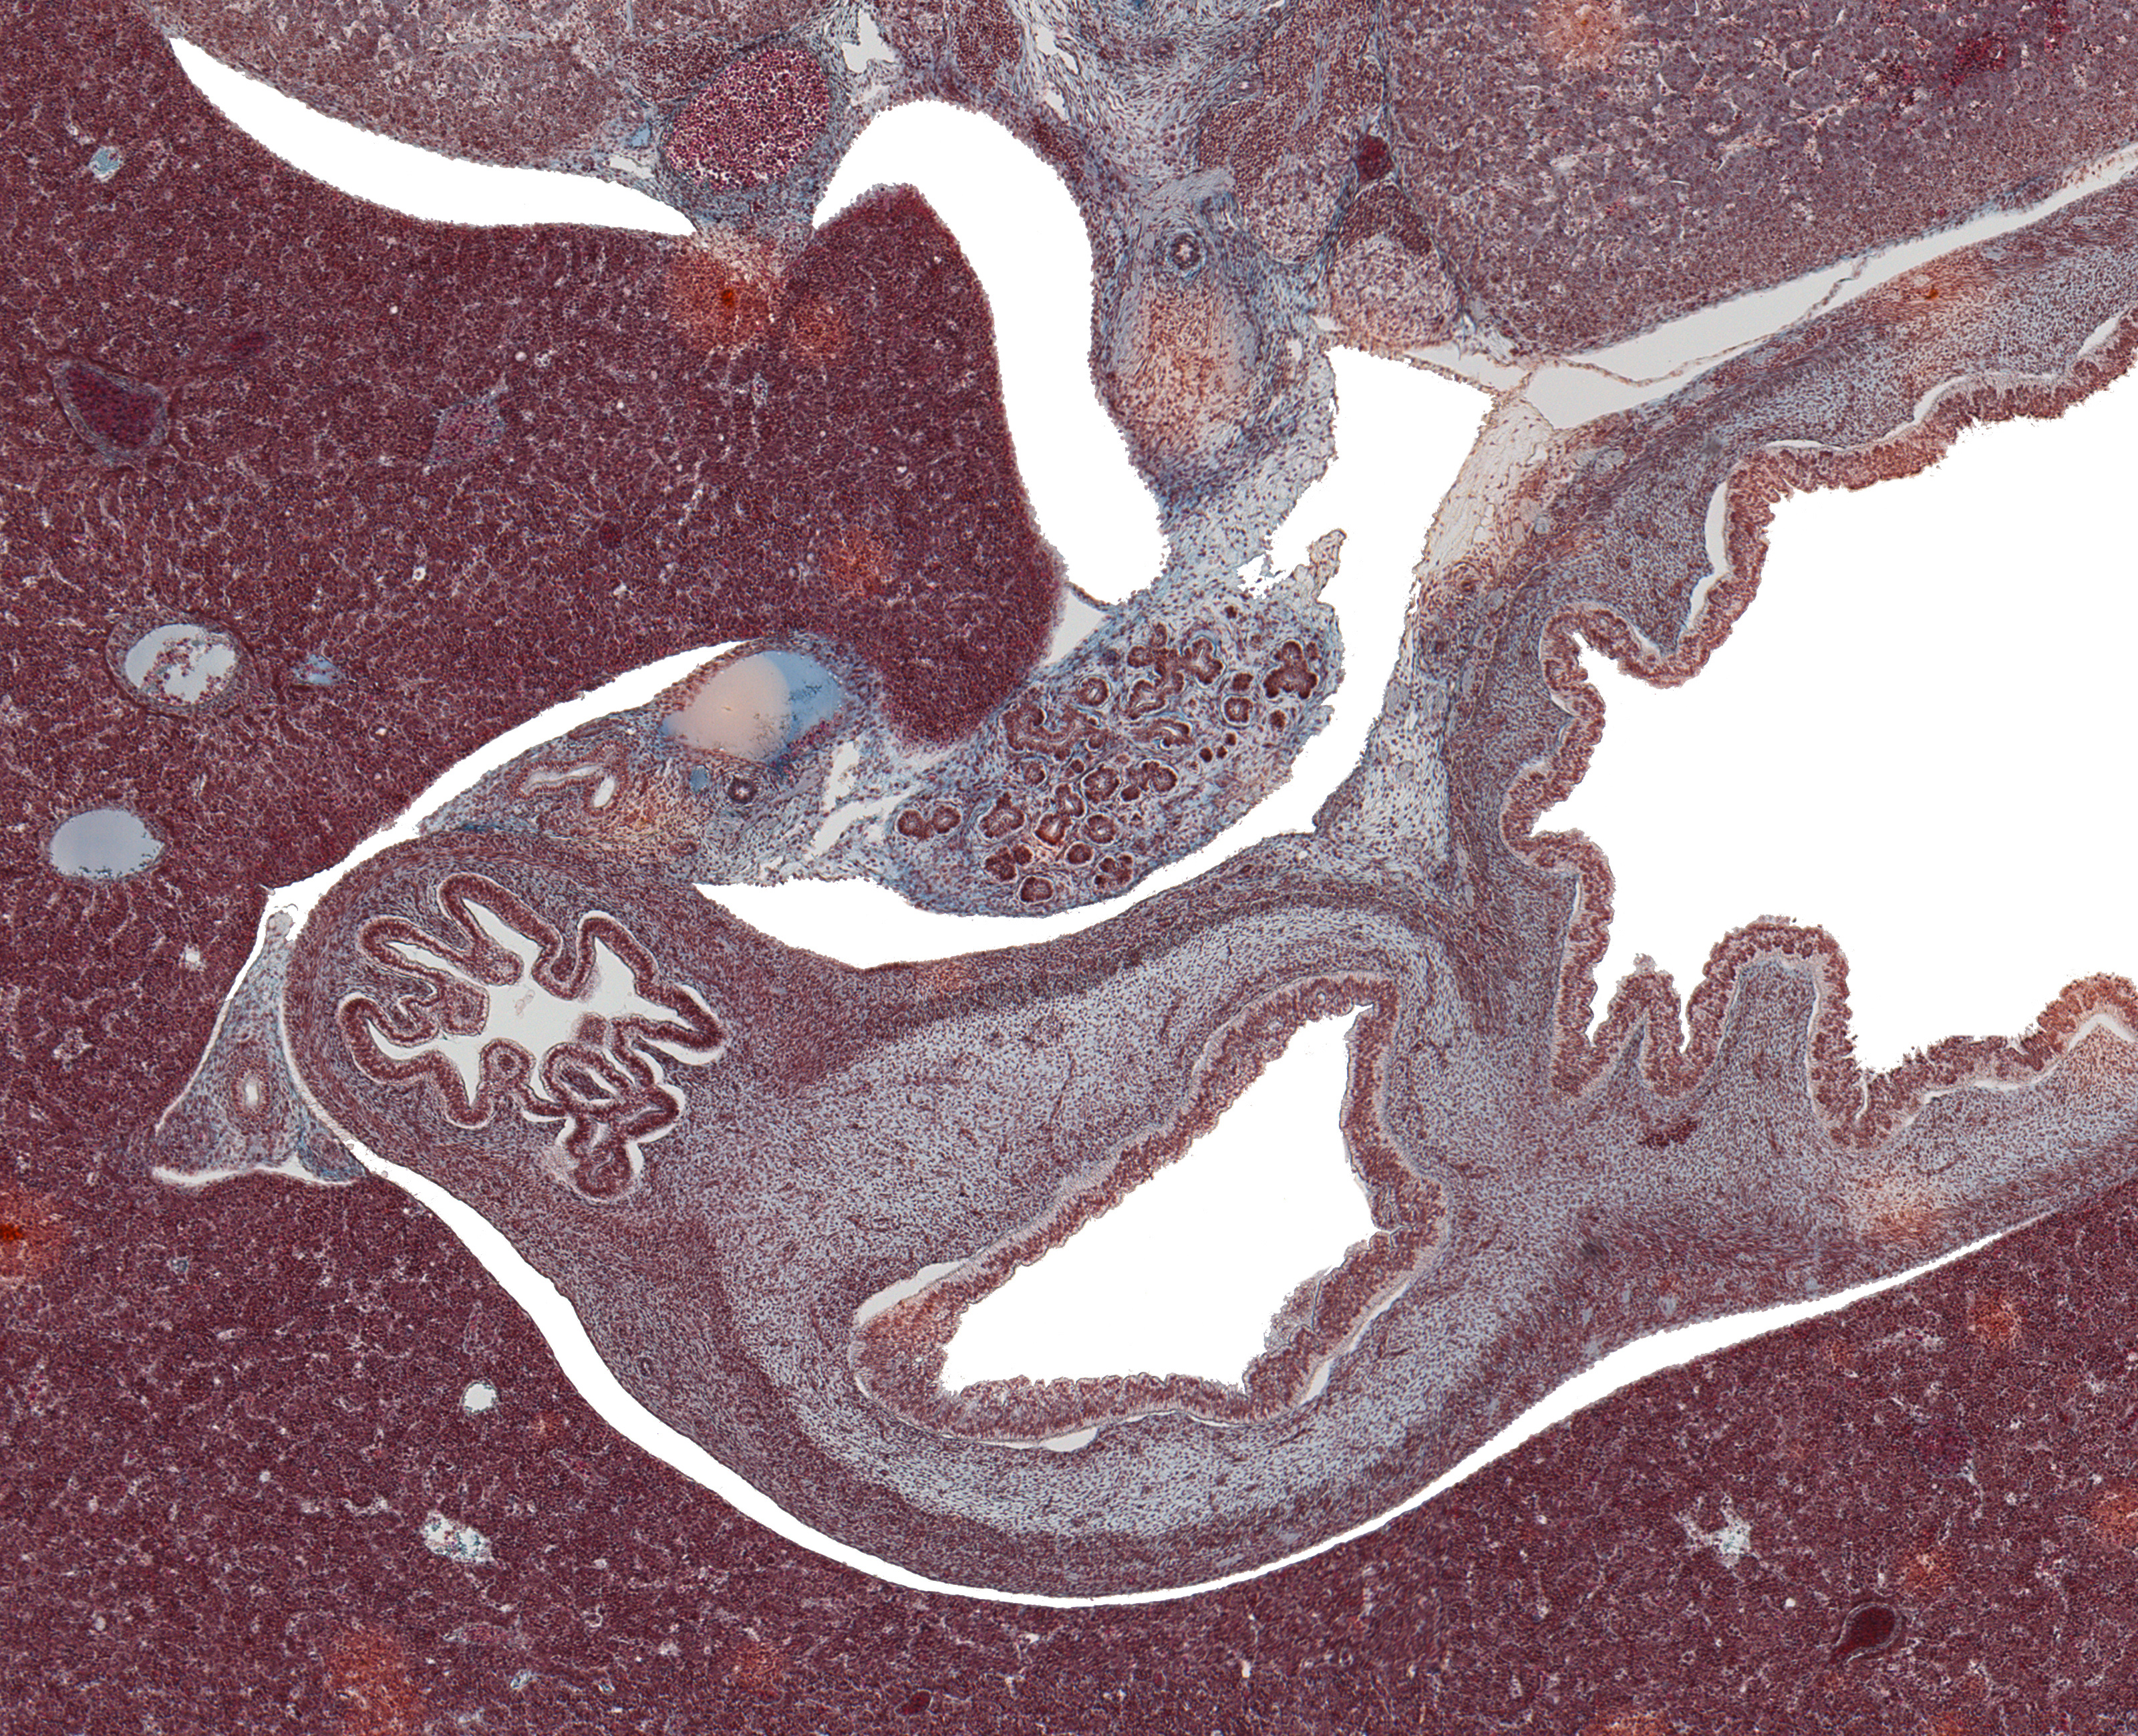 Body of Pancreas and Duodenum